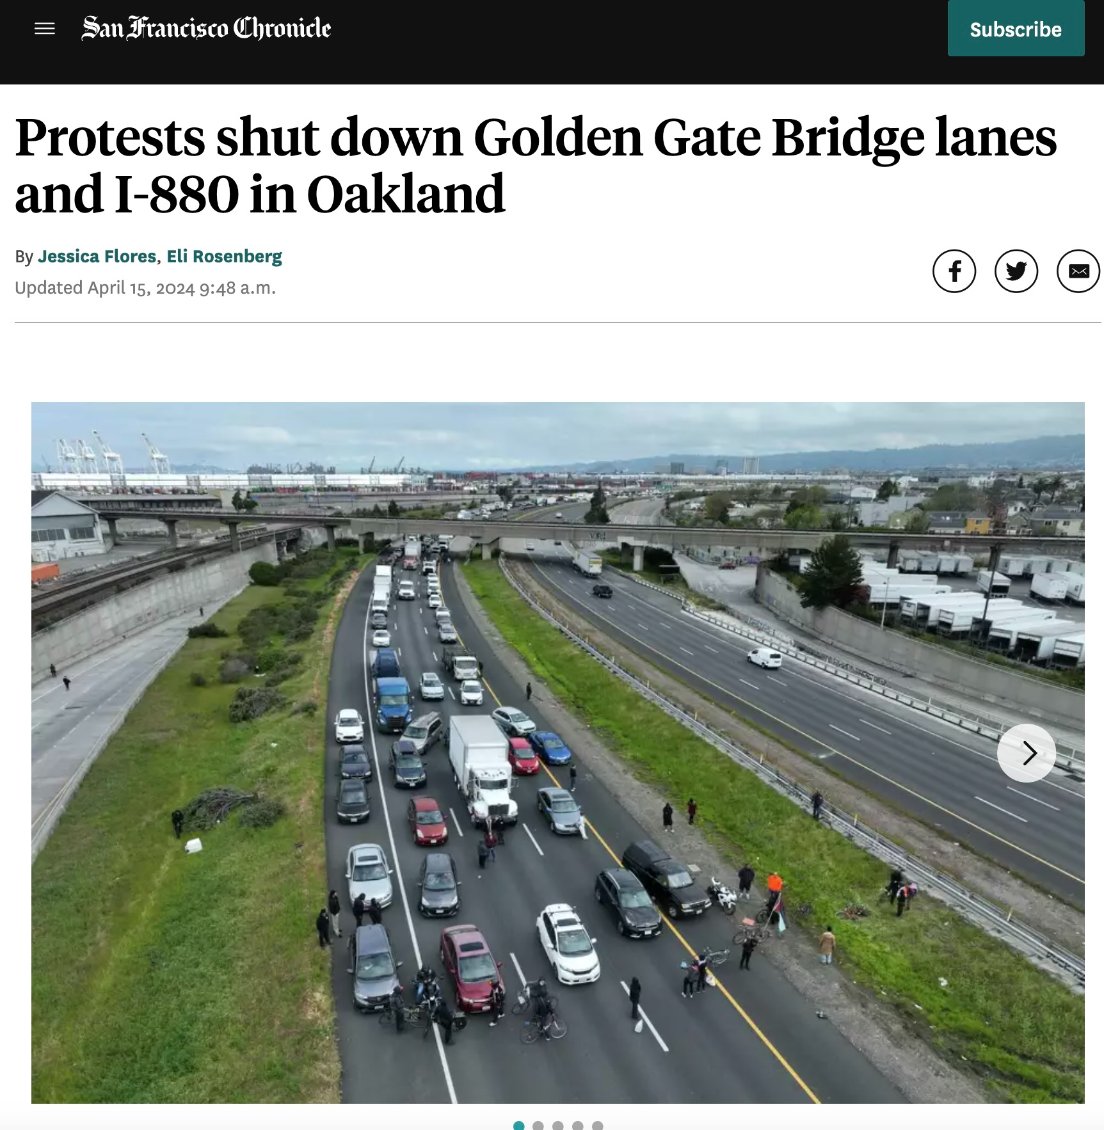 .@garrytan Is it time to make crime illegal in California yet? What do you think about hamassholes shutting down the Golden Gate Bridge & I-80 for hours while our elected leaders direct state and local law enforcement to do nothing? @GavinNewsom @LondonBreed @RobBonta